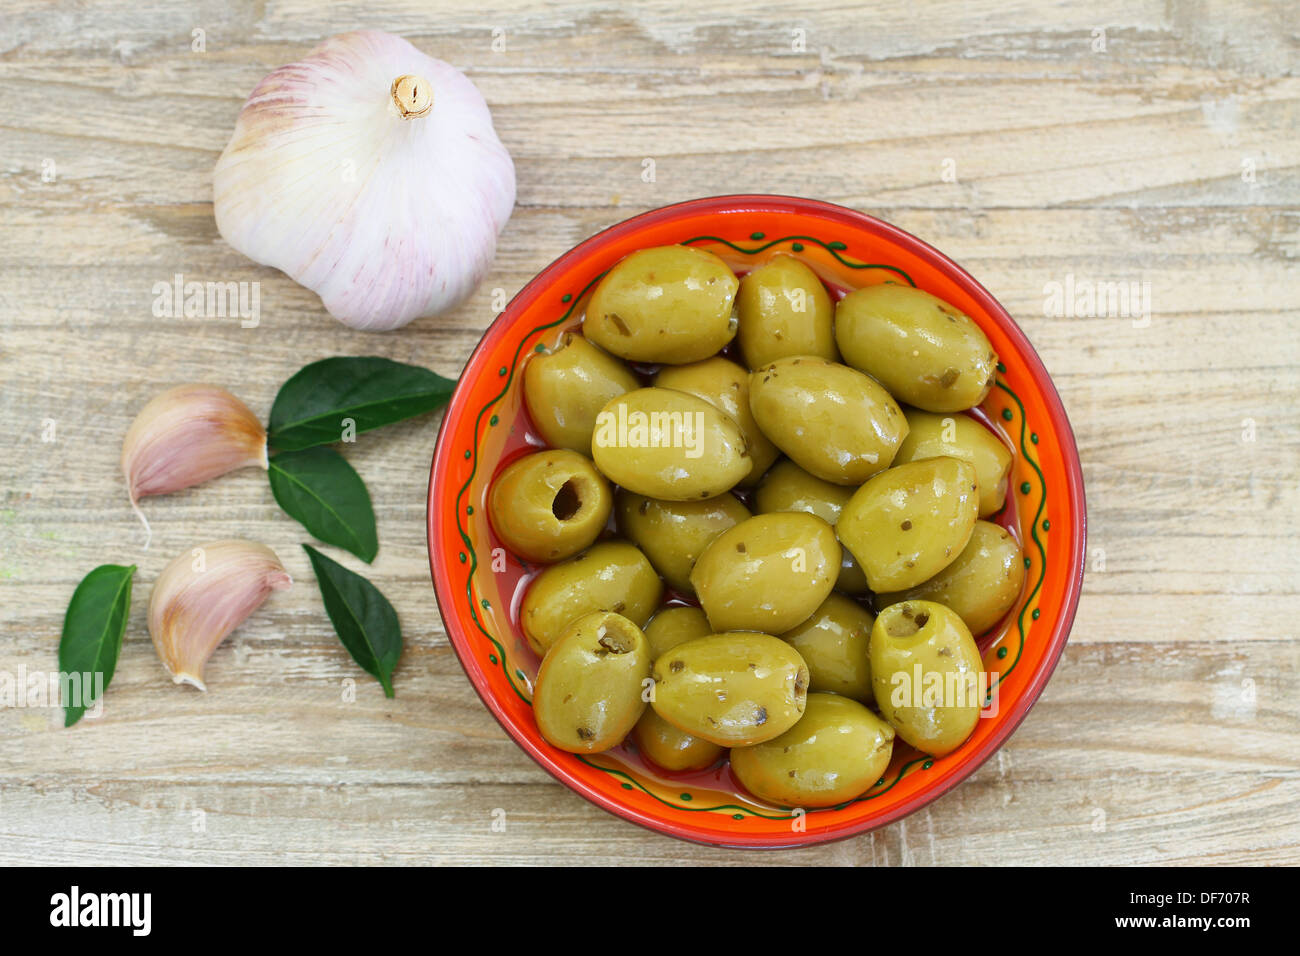 Green olives with garlic on wooden surface Stock Photo